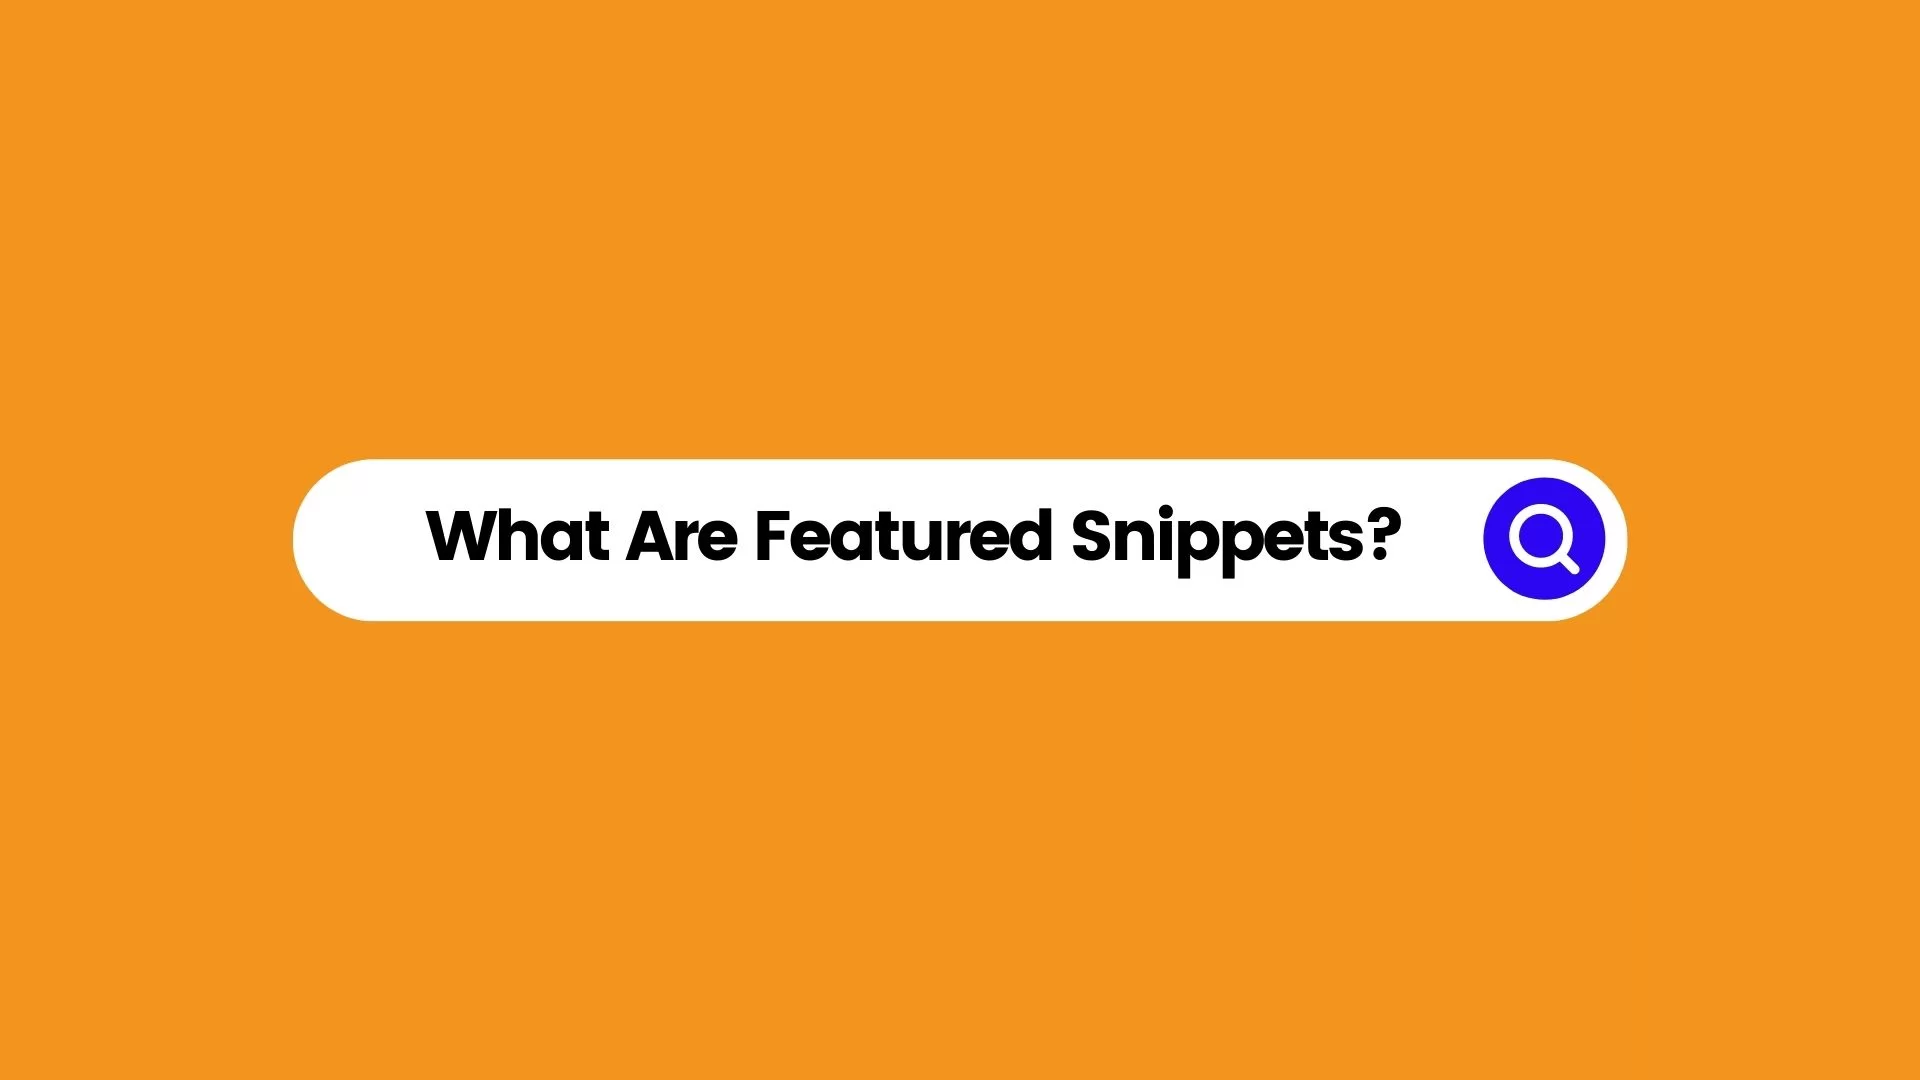 What Are Featured Snippets?